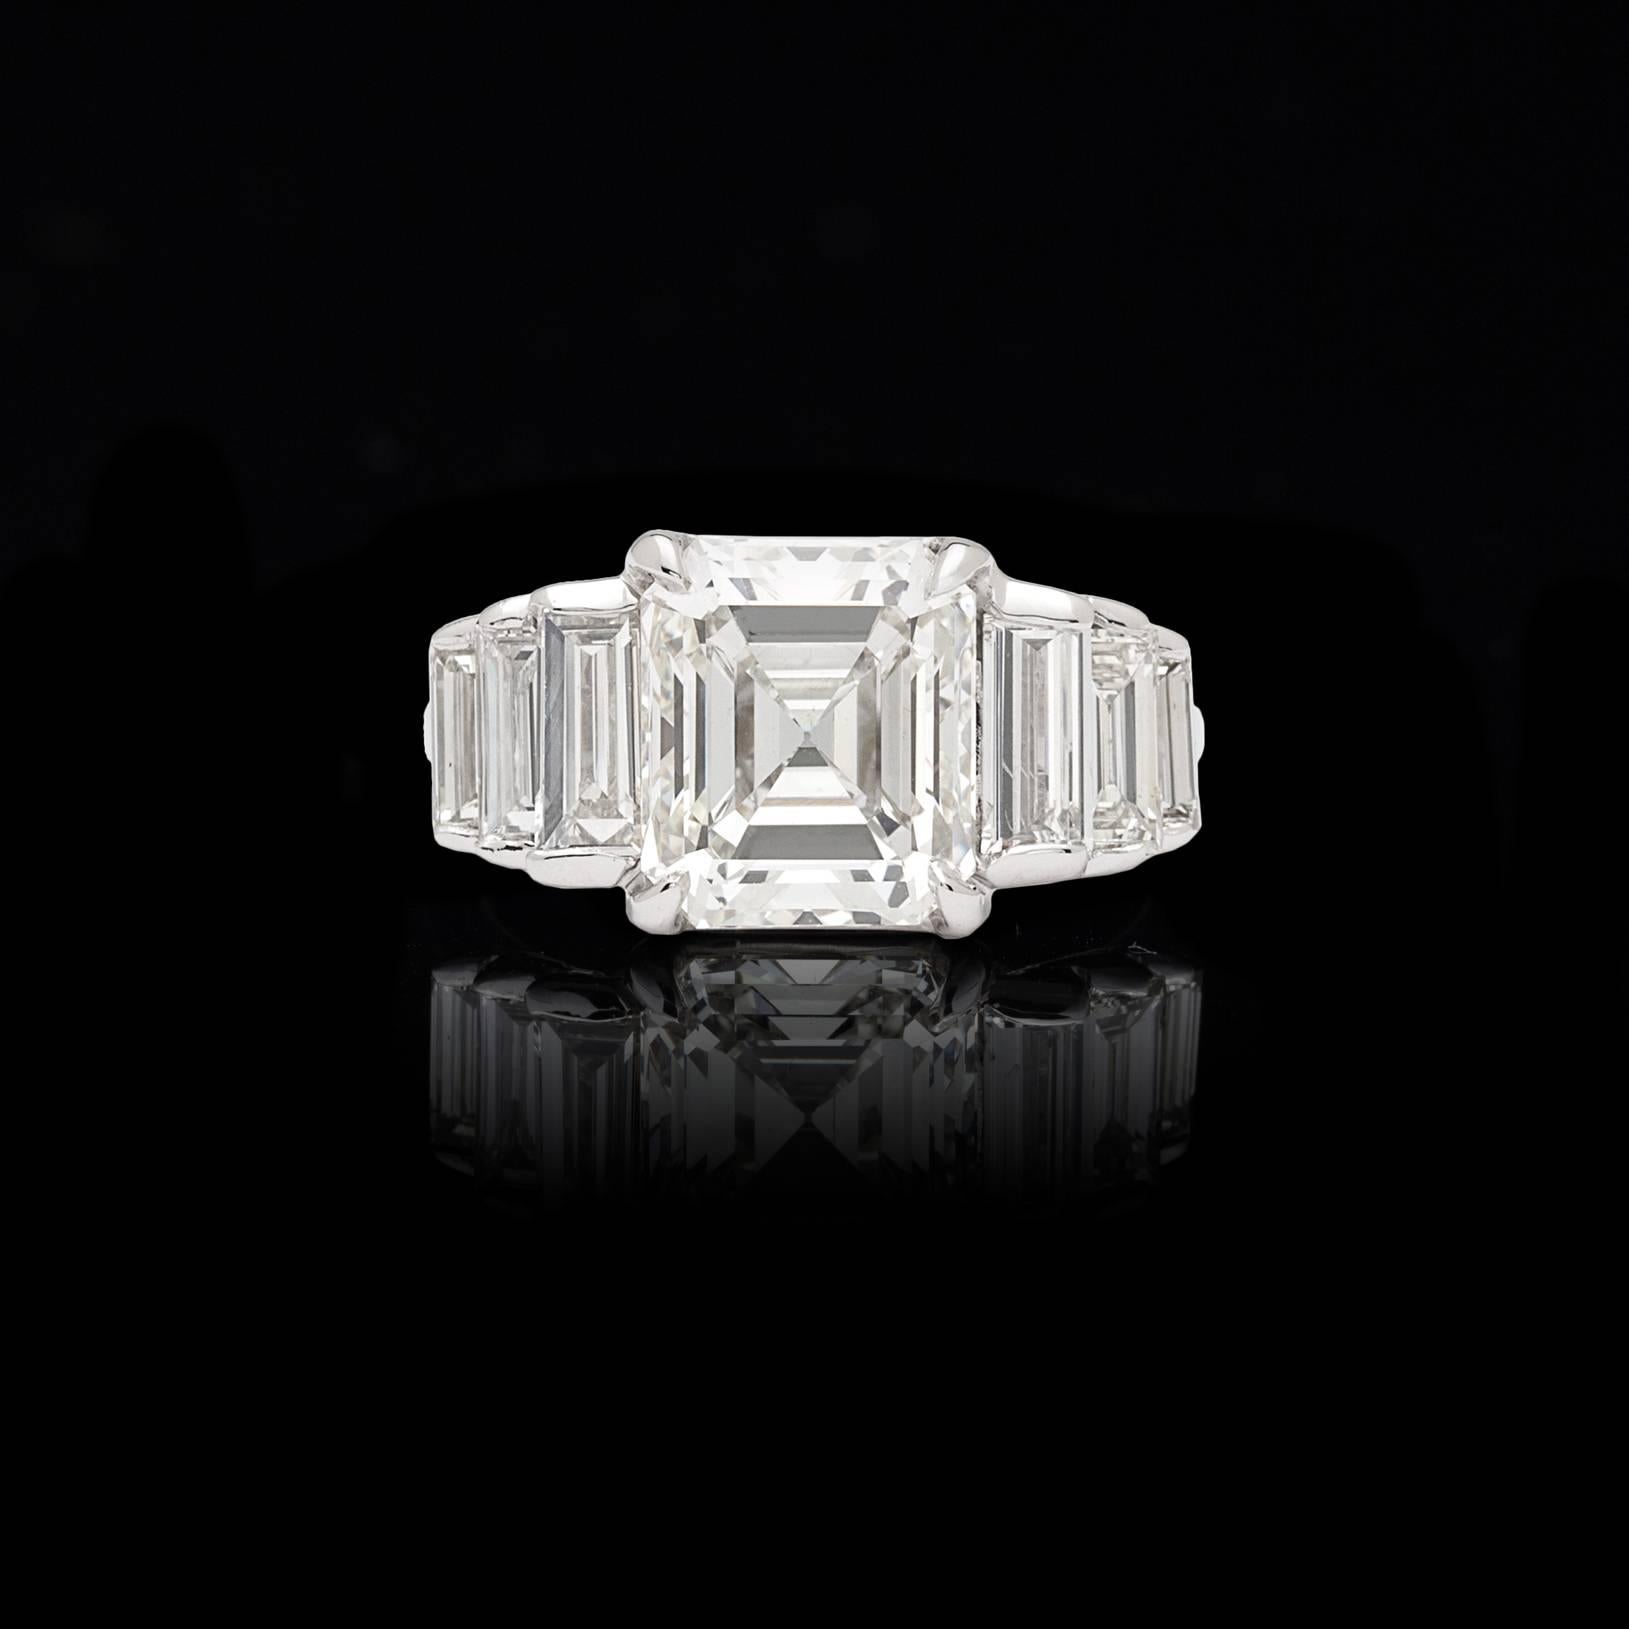 Looking for a showstopper? Then look no further! This gorgeous 18 karat white gold beauty features a remarkable 3.68 carat GIA graded Emerald Cut Diamond (J/VS1) flanked by 6 perfectly matched Baguette Cut Diamonds (3 on either side) for an